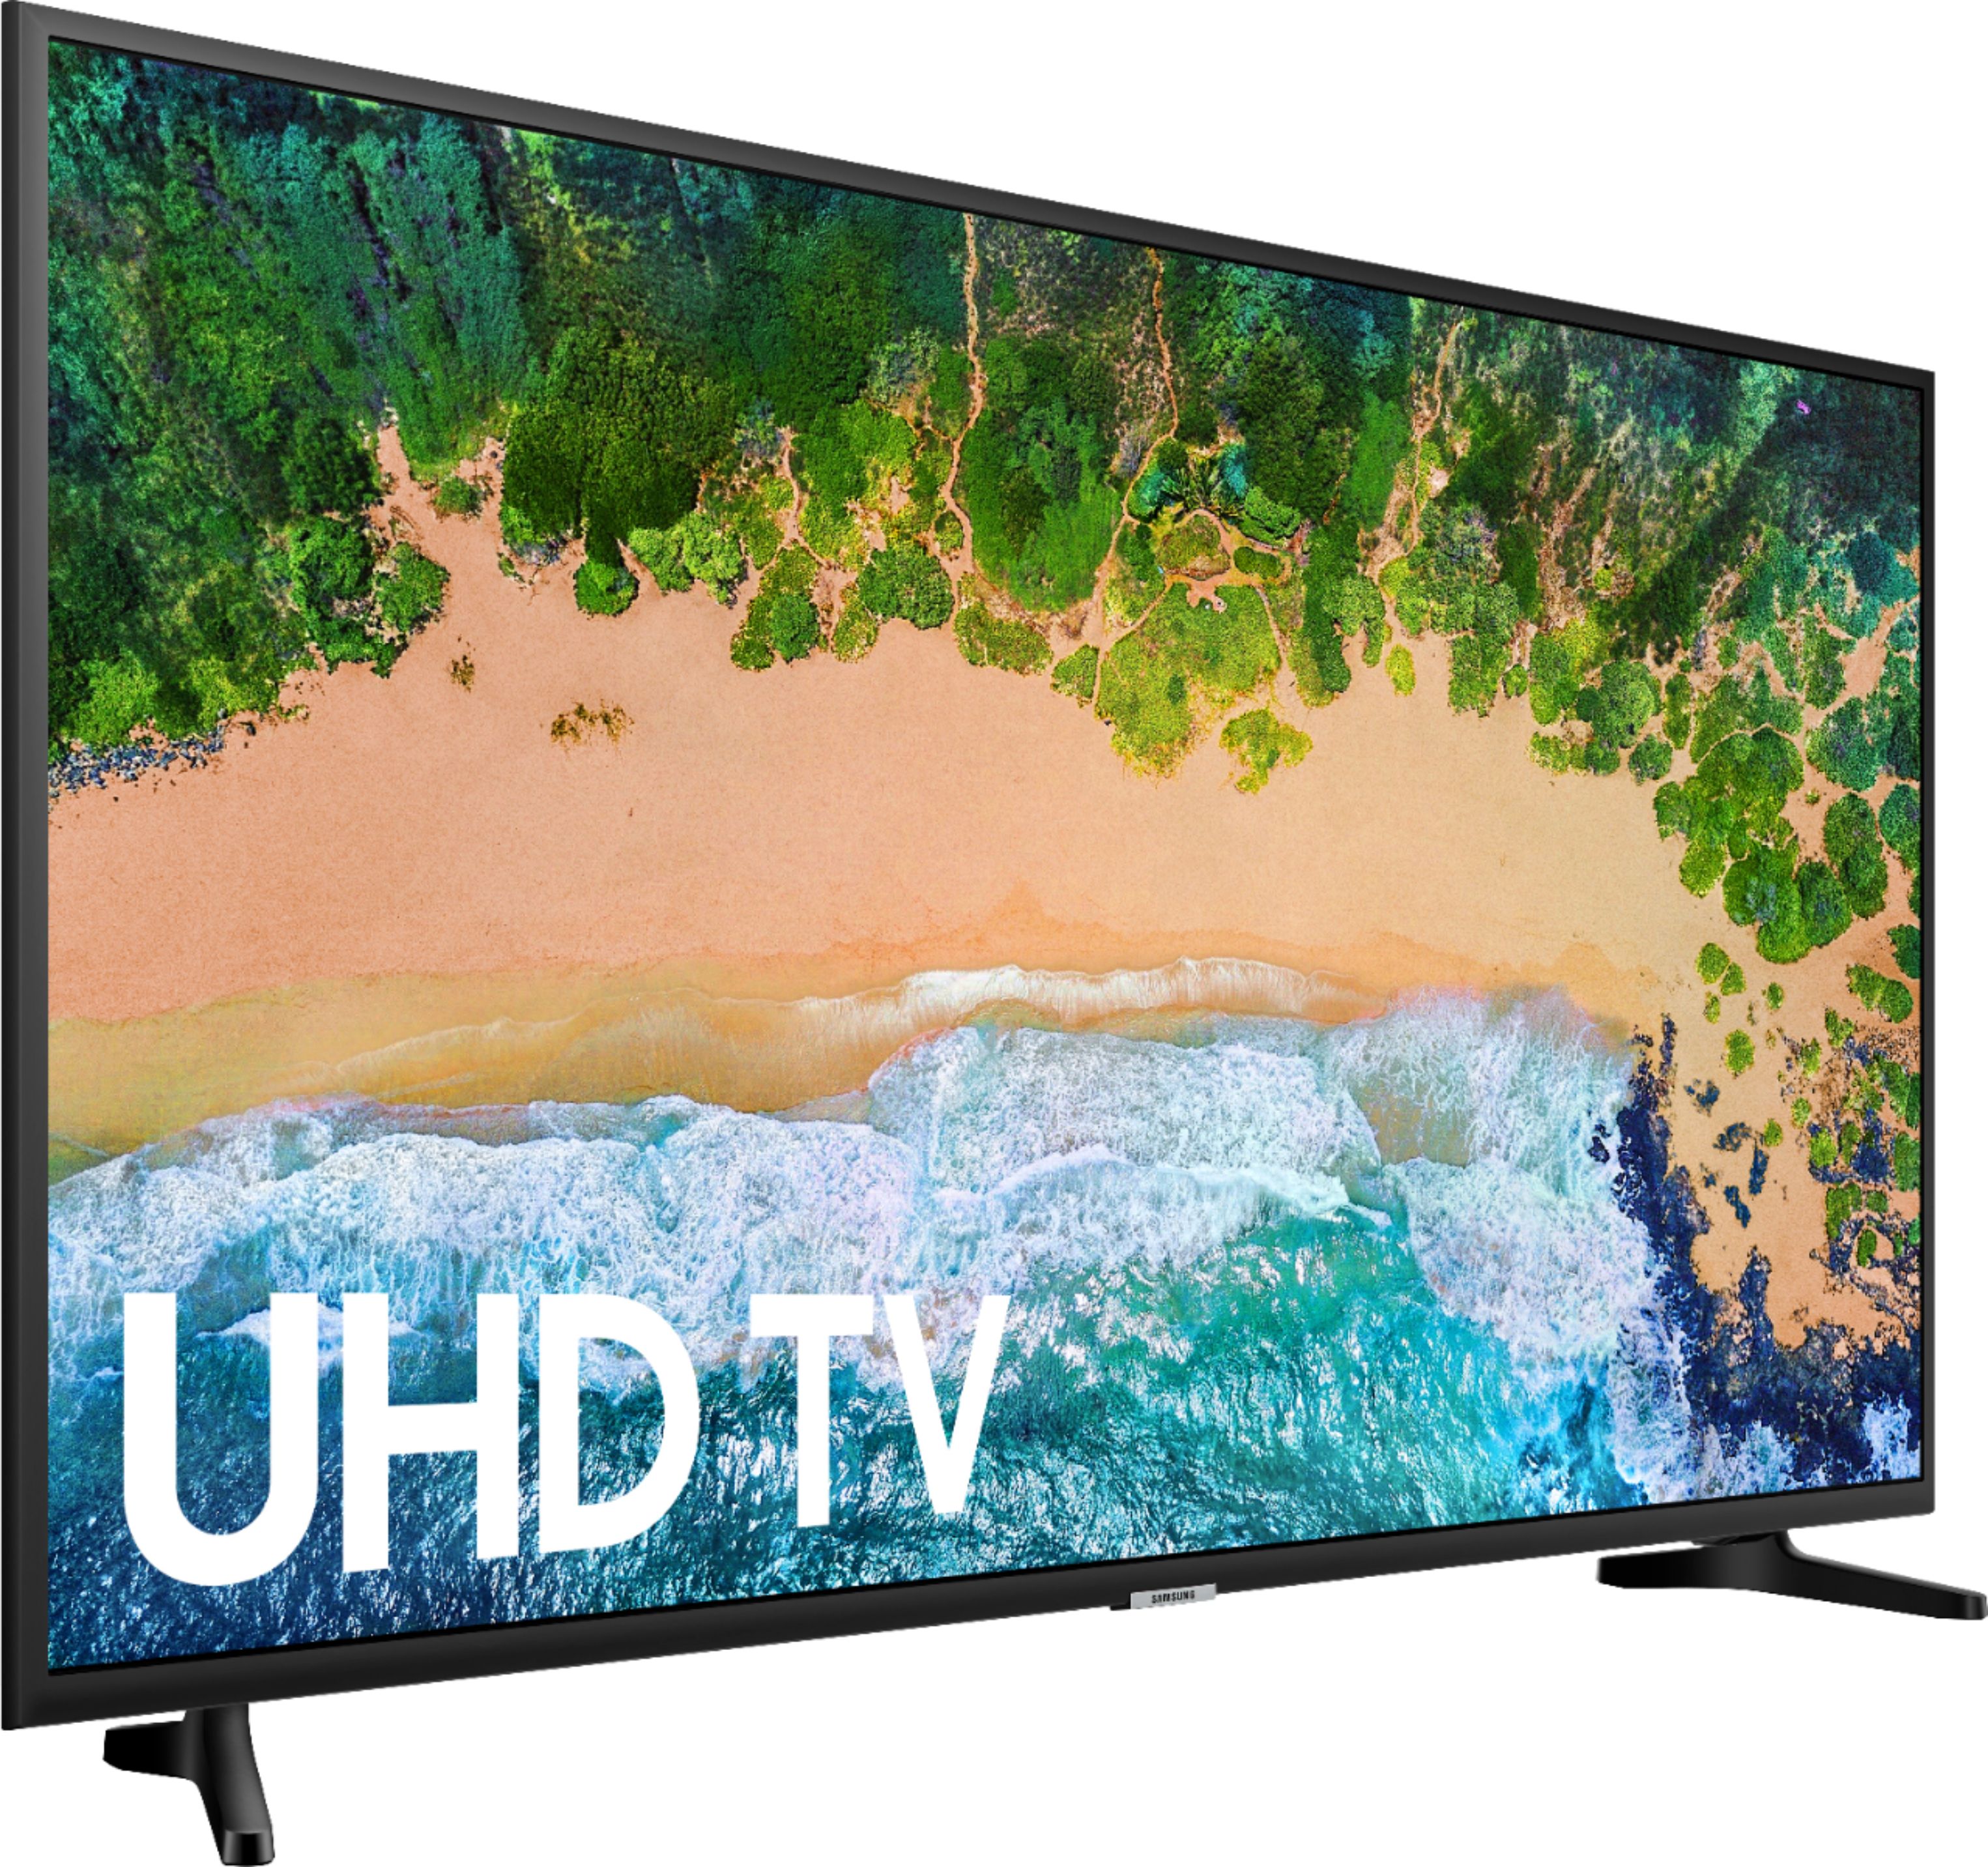 Angle View: Samsung - 43" Class - LED - NU6900 Series - 2160p - Smart - 4K UHD TV with HDR